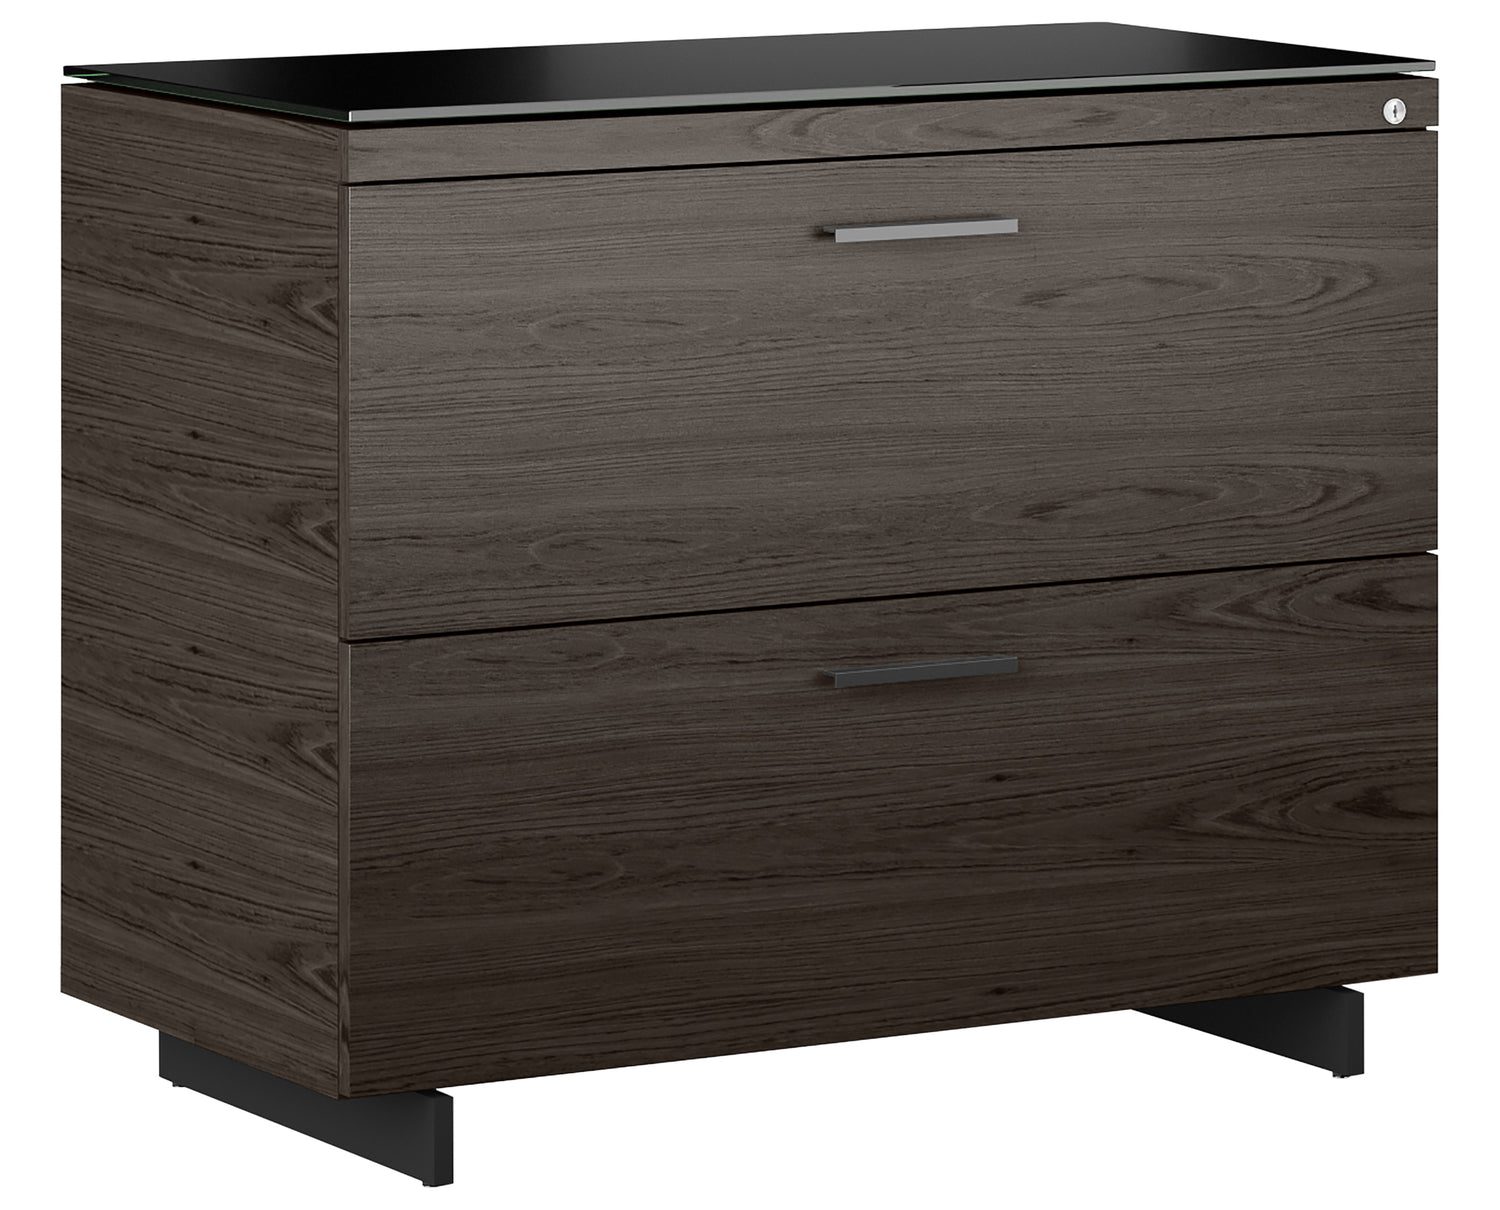 Charcoal Ash Veneer & Black Satin-Etched Glass with Black Steel | BDI Sequel Lateral File Cabinet | Valley Ridge Furniture